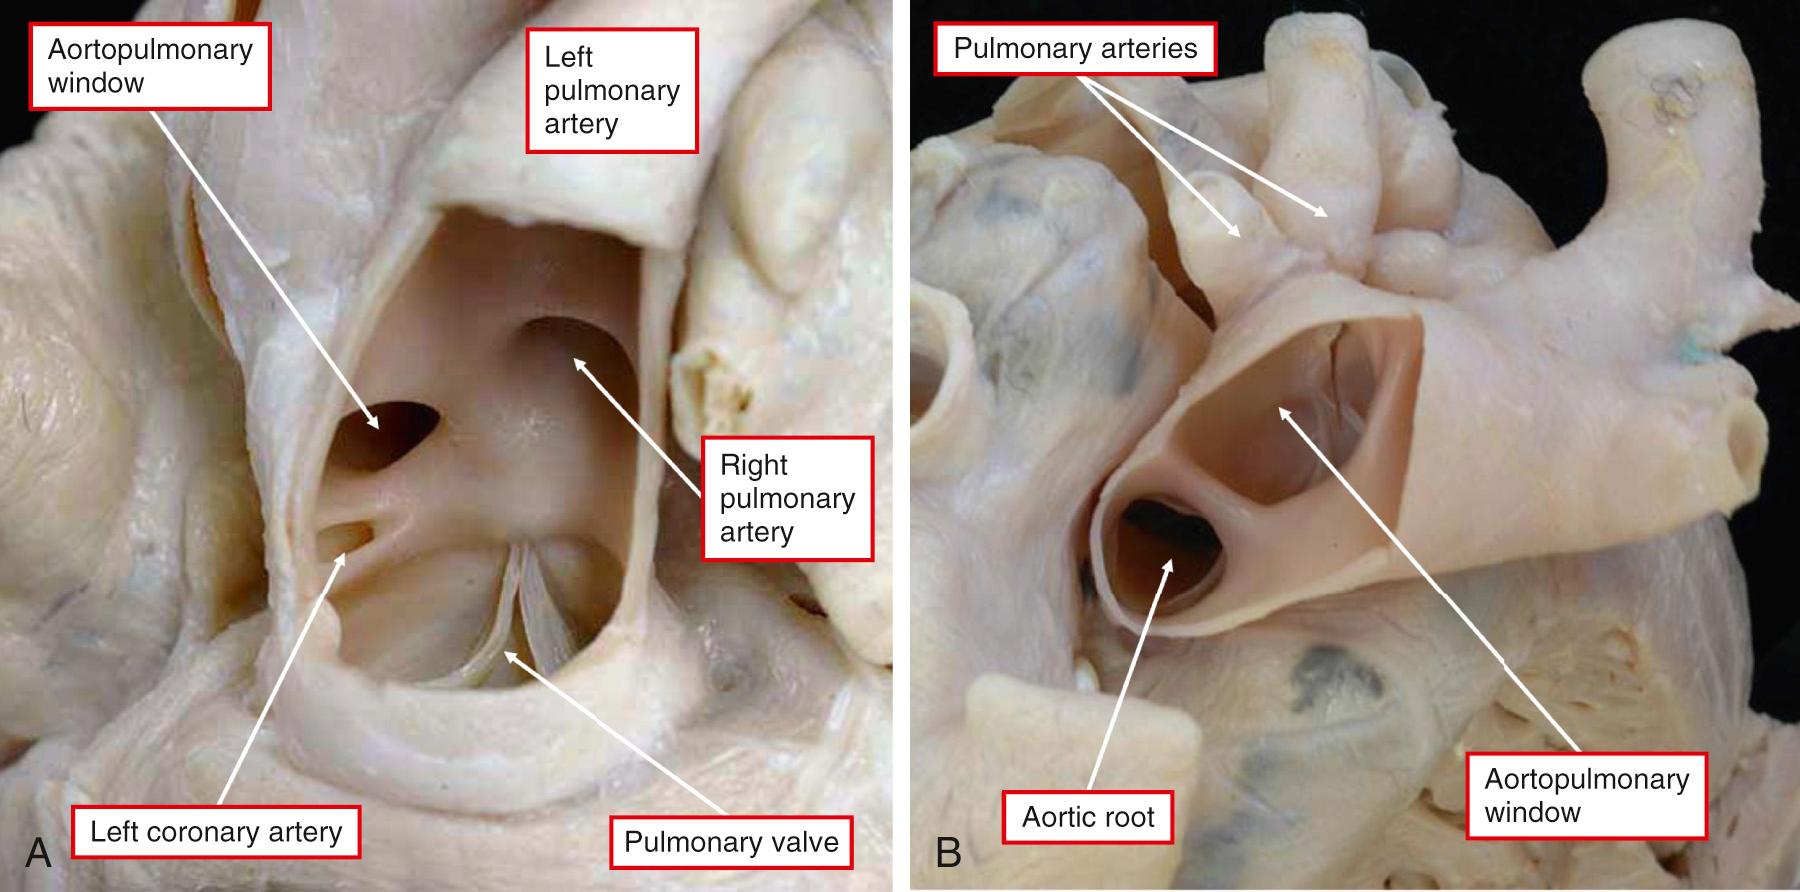 Fig. 51.7, A small aortopulmonary window as seen from the pulmonary trunk (A) and a large aortopulmonary window extending to the margins of the pericardial cavity as seen from the aortic aspect (B). Note the presence of the anomalous origin of the left coronary artery from the pulmonary trunk (A) and the origin of the right pulmonary artery from the aorta (B).